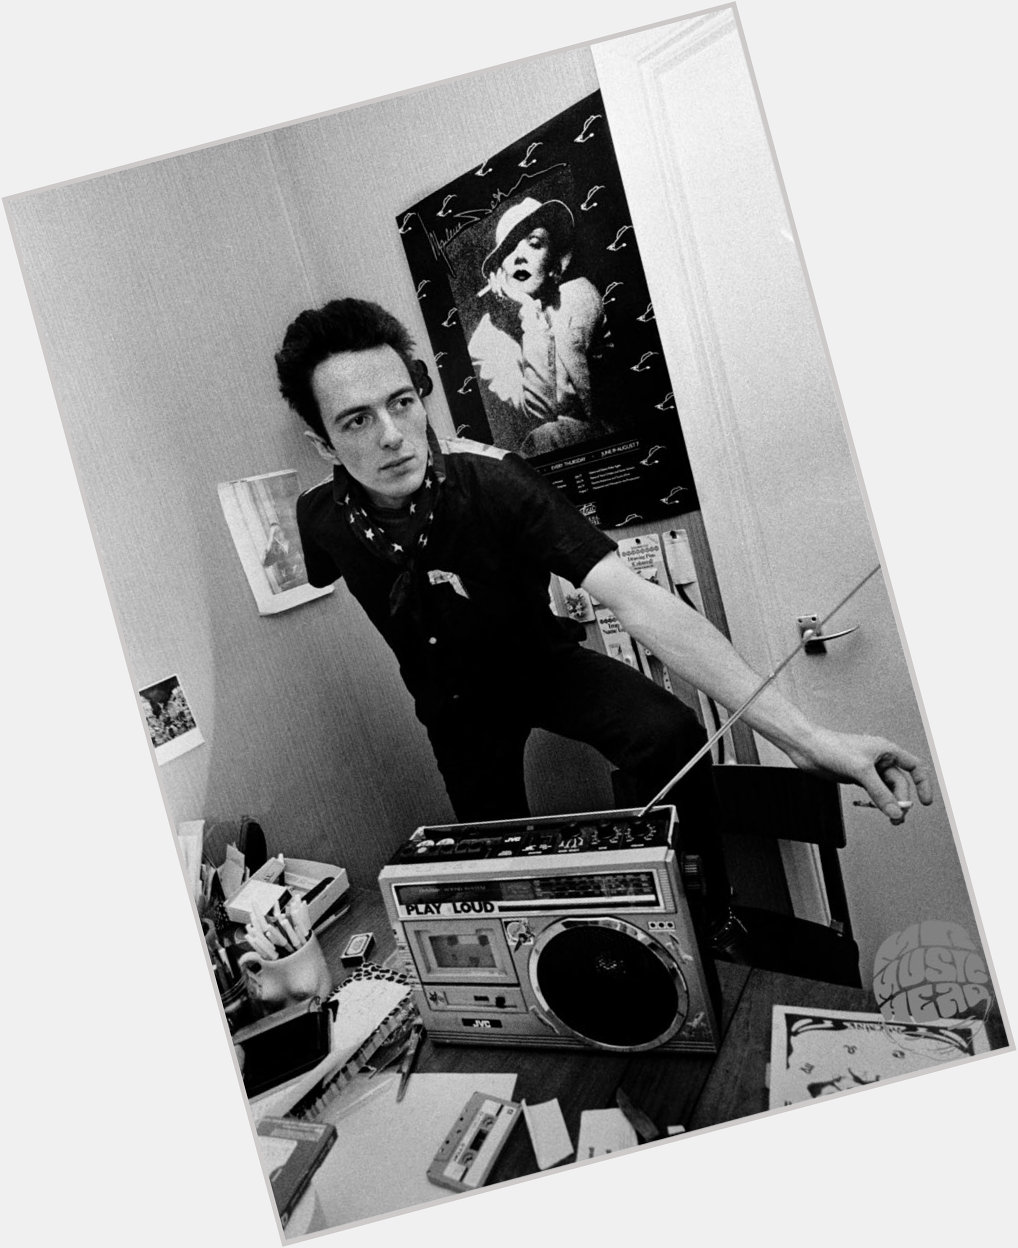 Long live Saint Joe Strummer. 

Happy birthday. I don t have any other message than don t forget you are alive. 